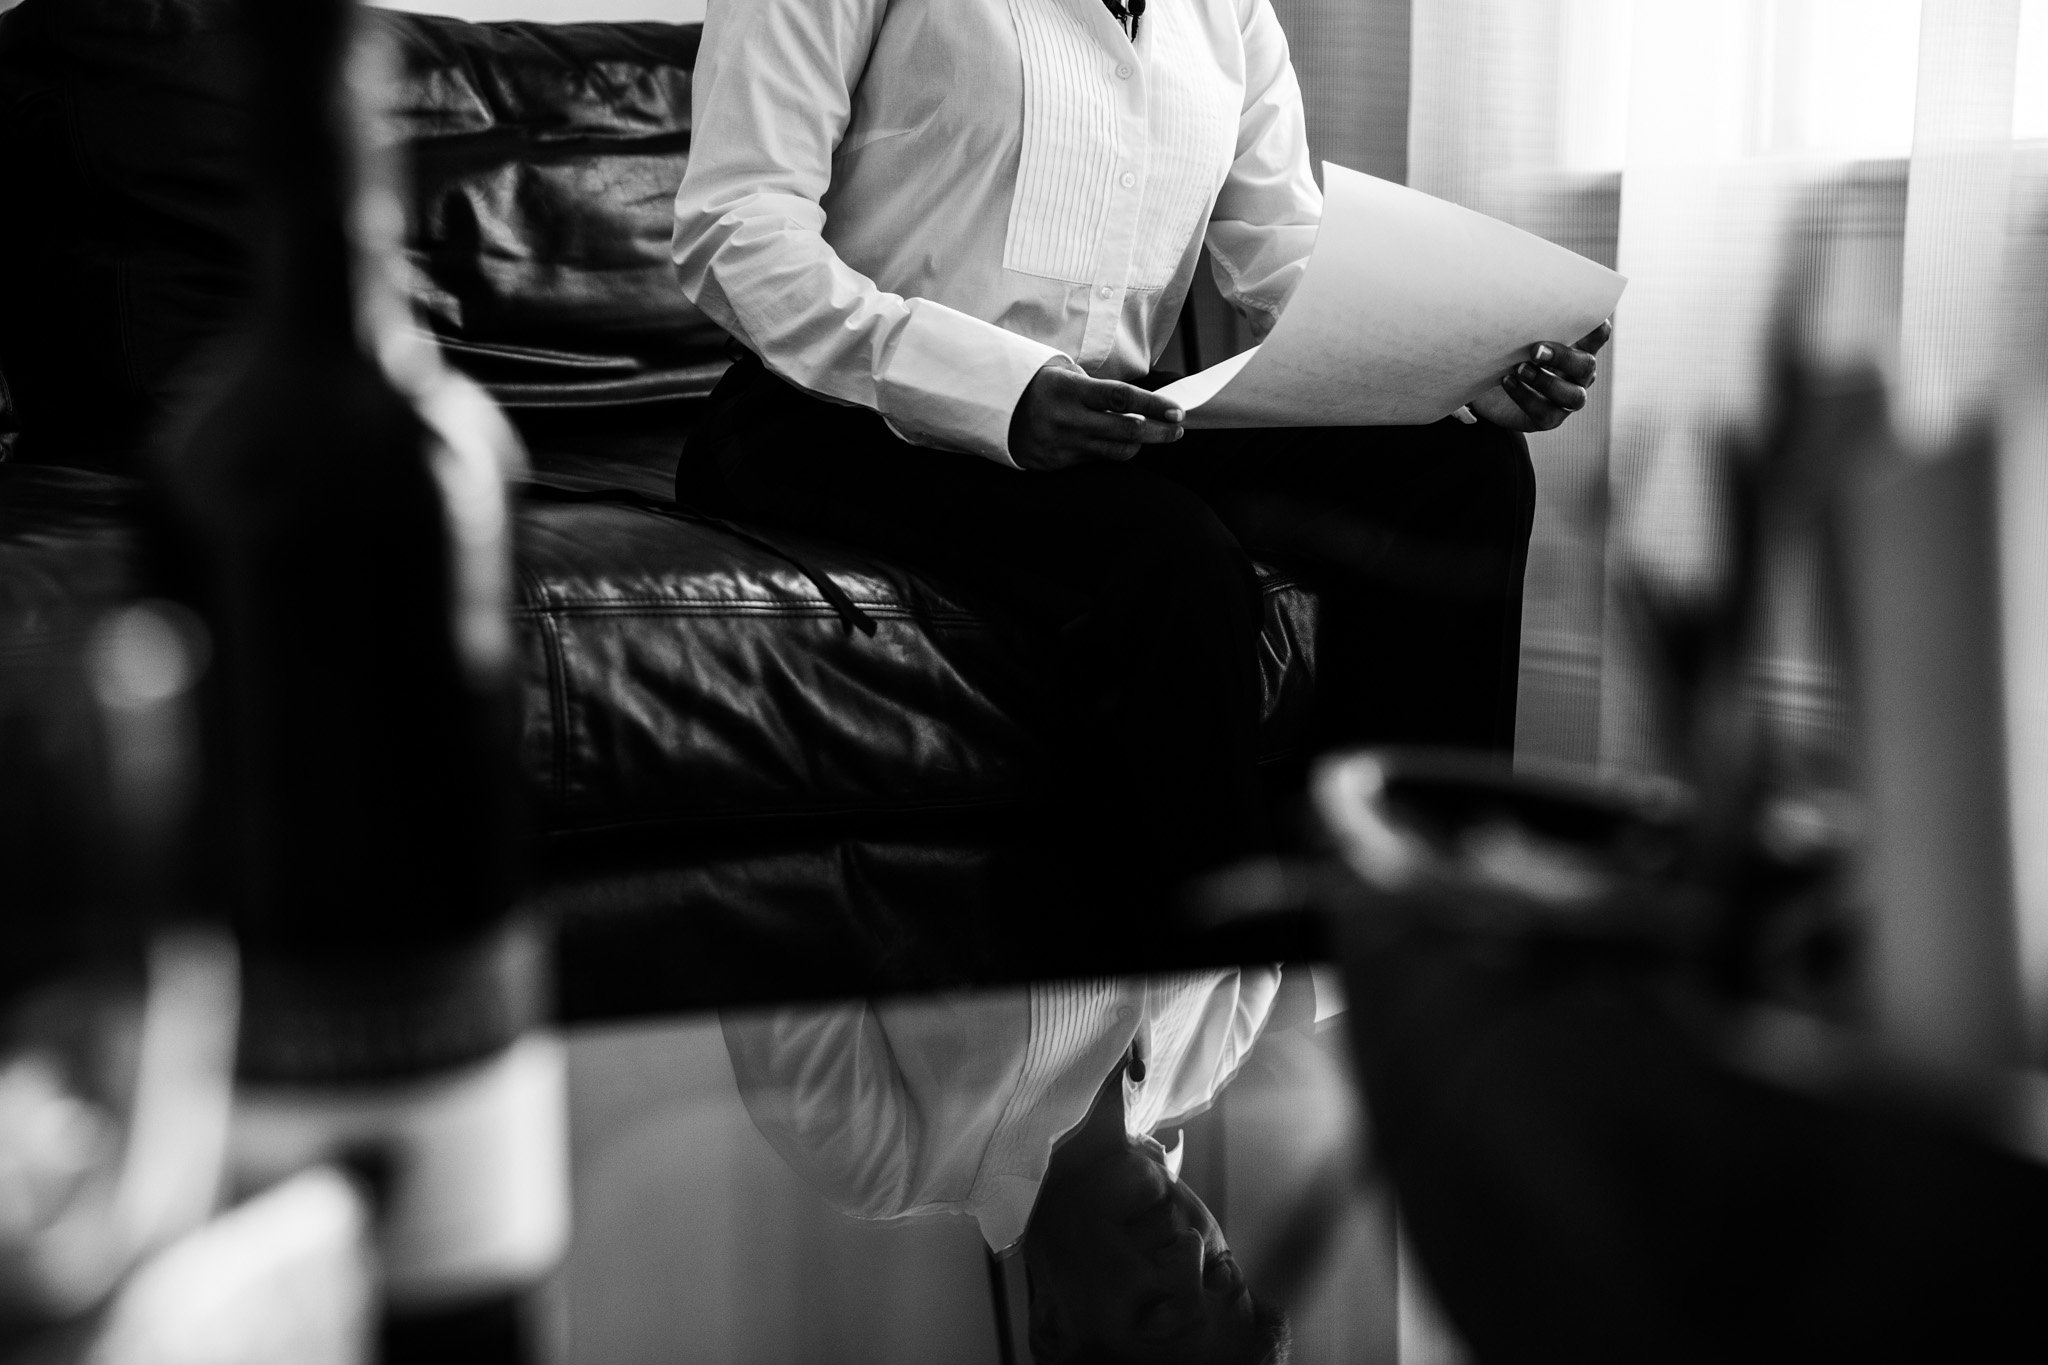 bride reading letter from future wife on wedding day in black and white with a reflection in glass coffee table.jpg